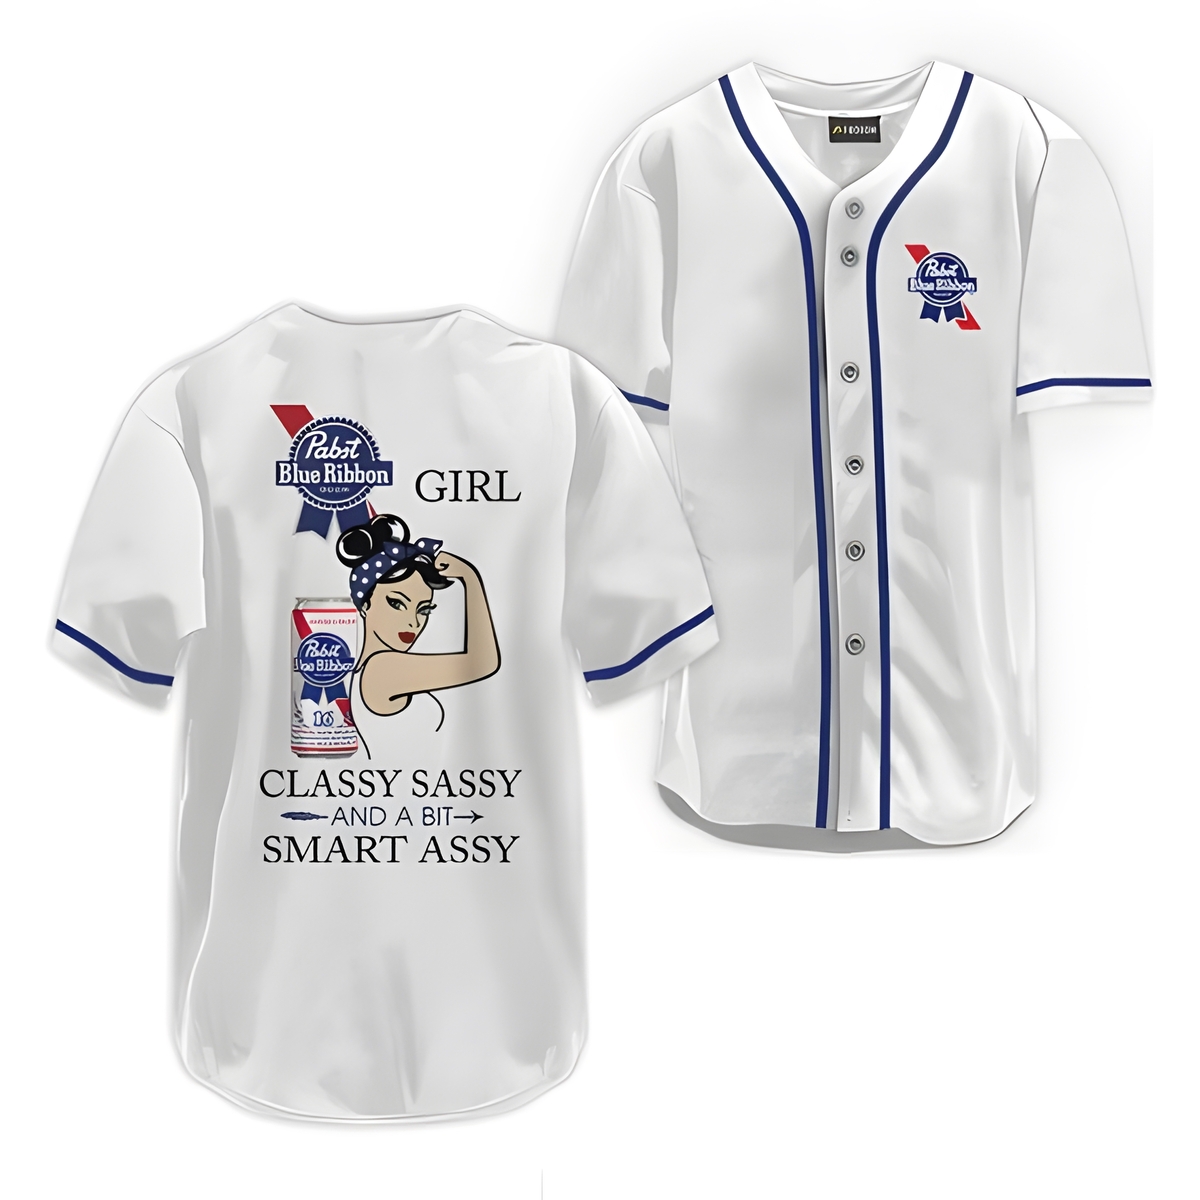 Pabst Blue Ribbon Baseball Jersey Girl Classy Sassy And A Bit Smart Assy Gift For Beer Lovers